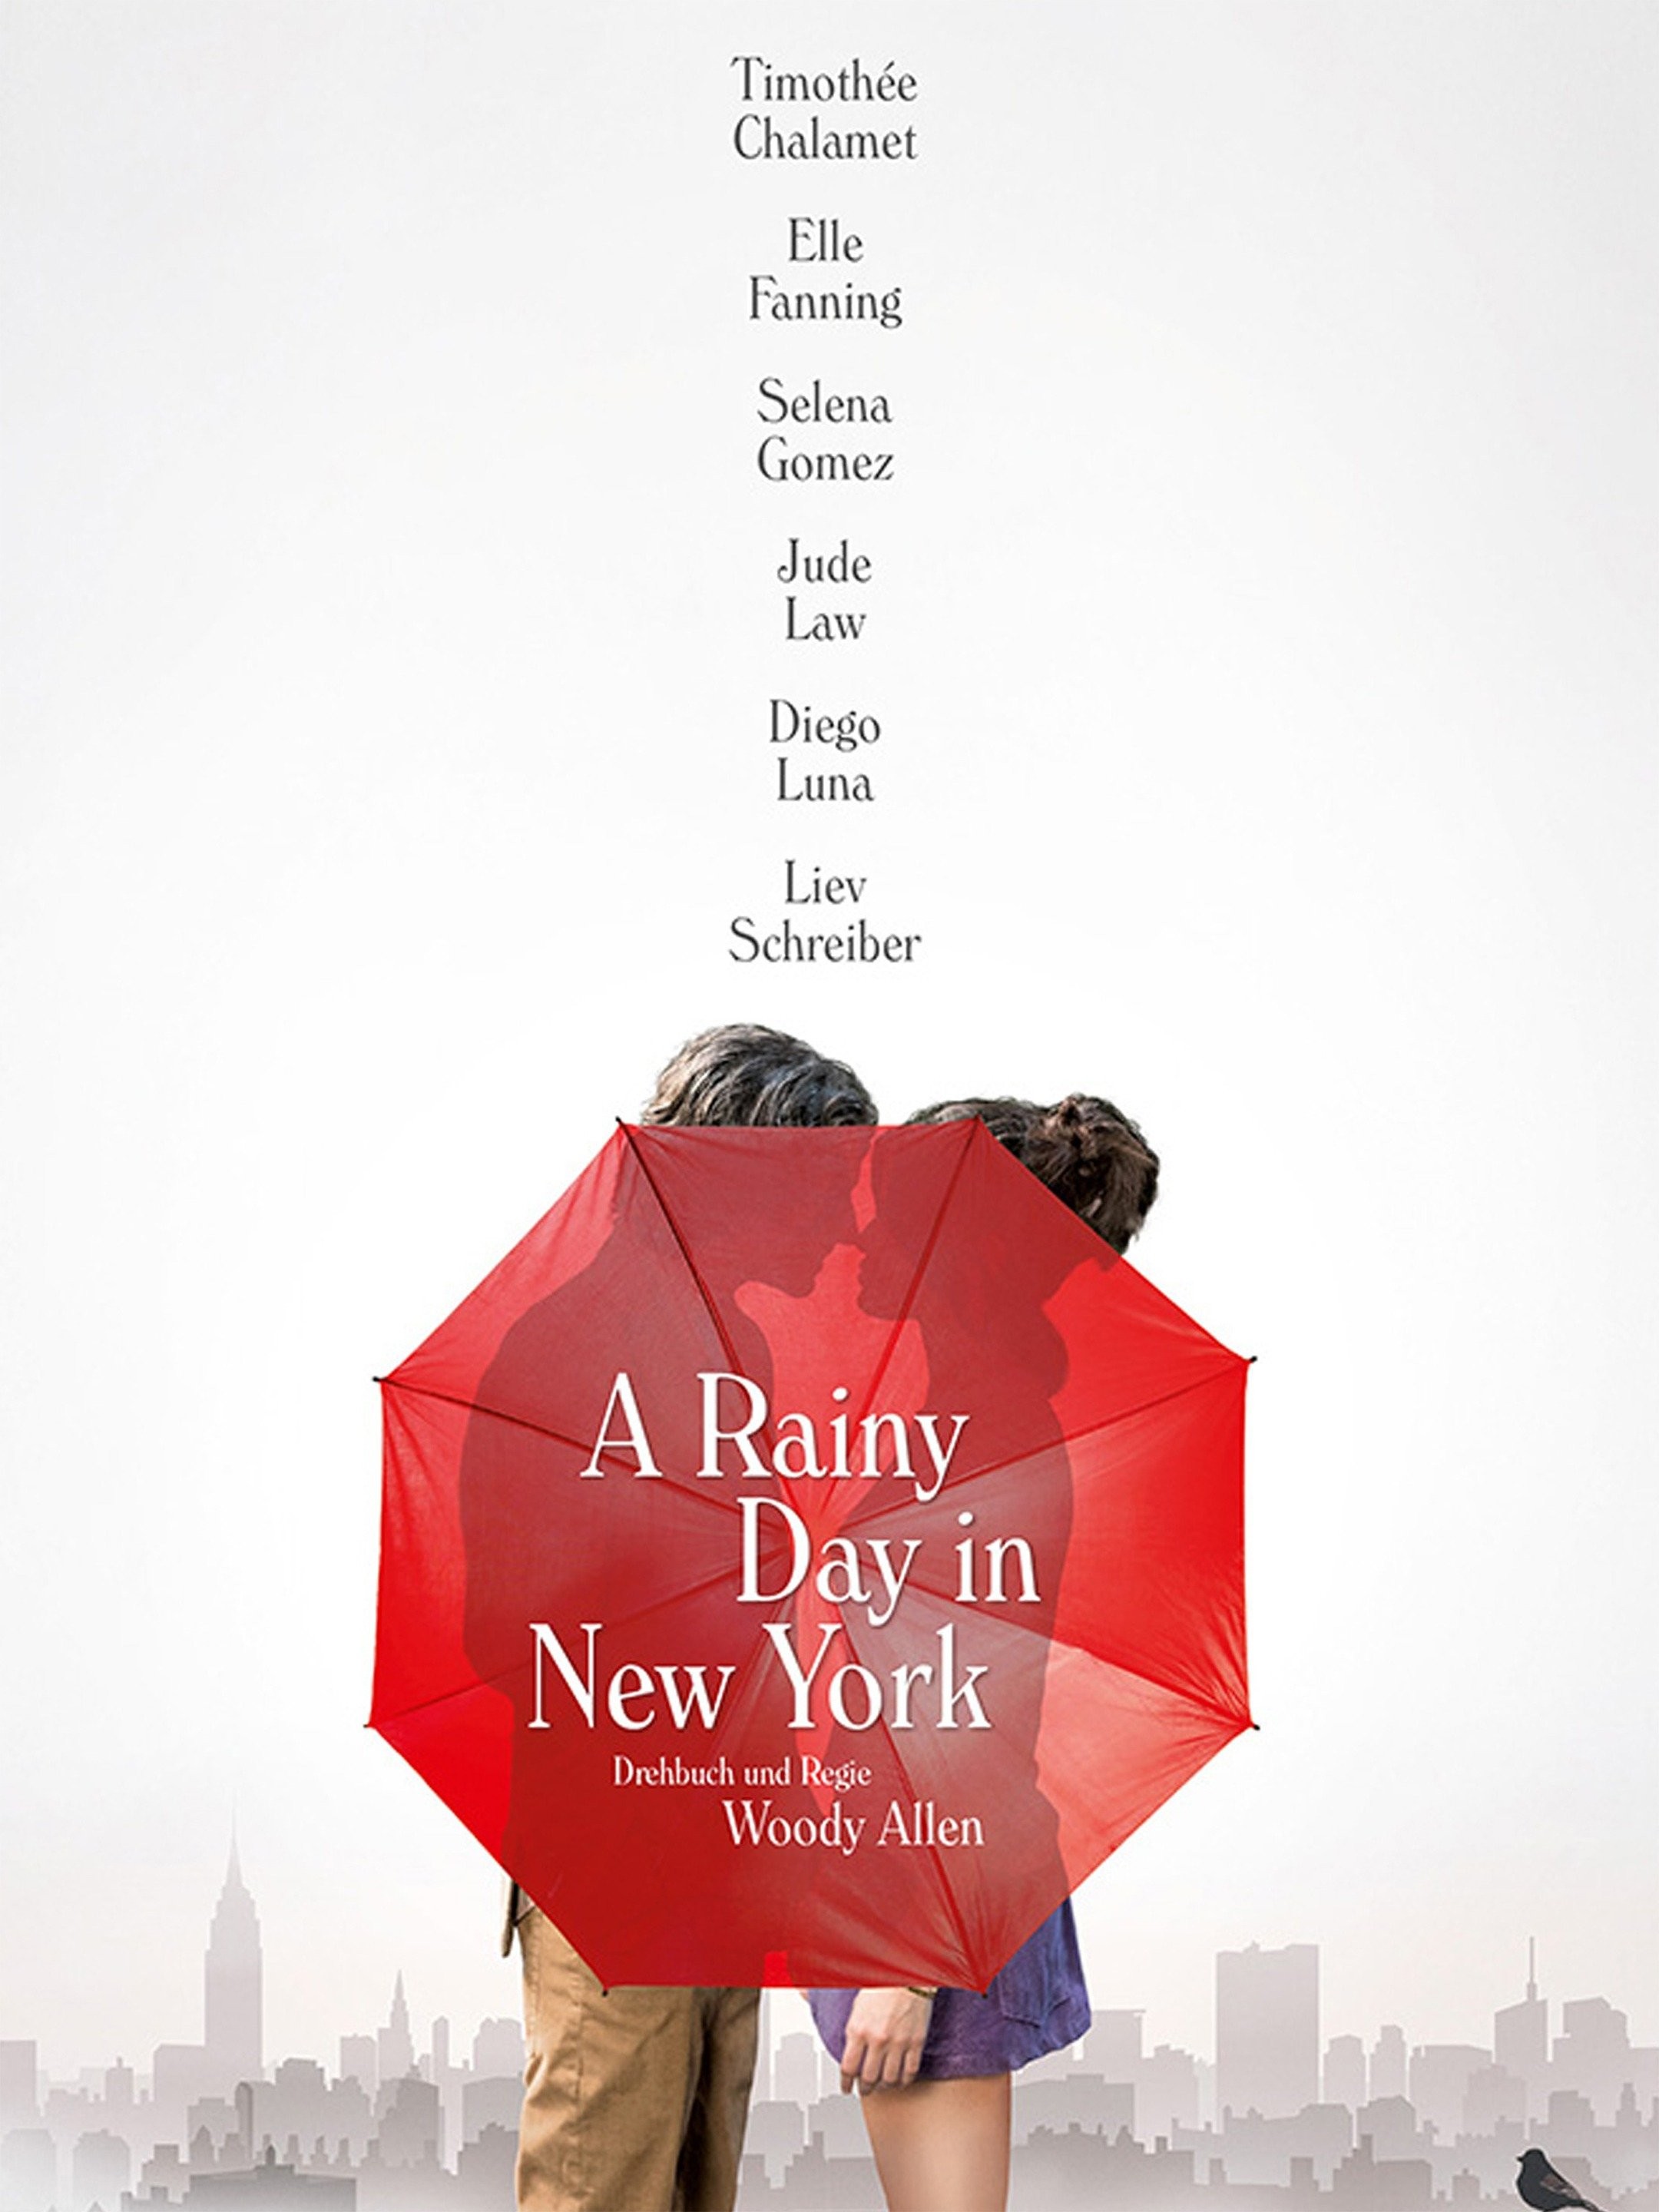 Watch A Rainy Day in New York